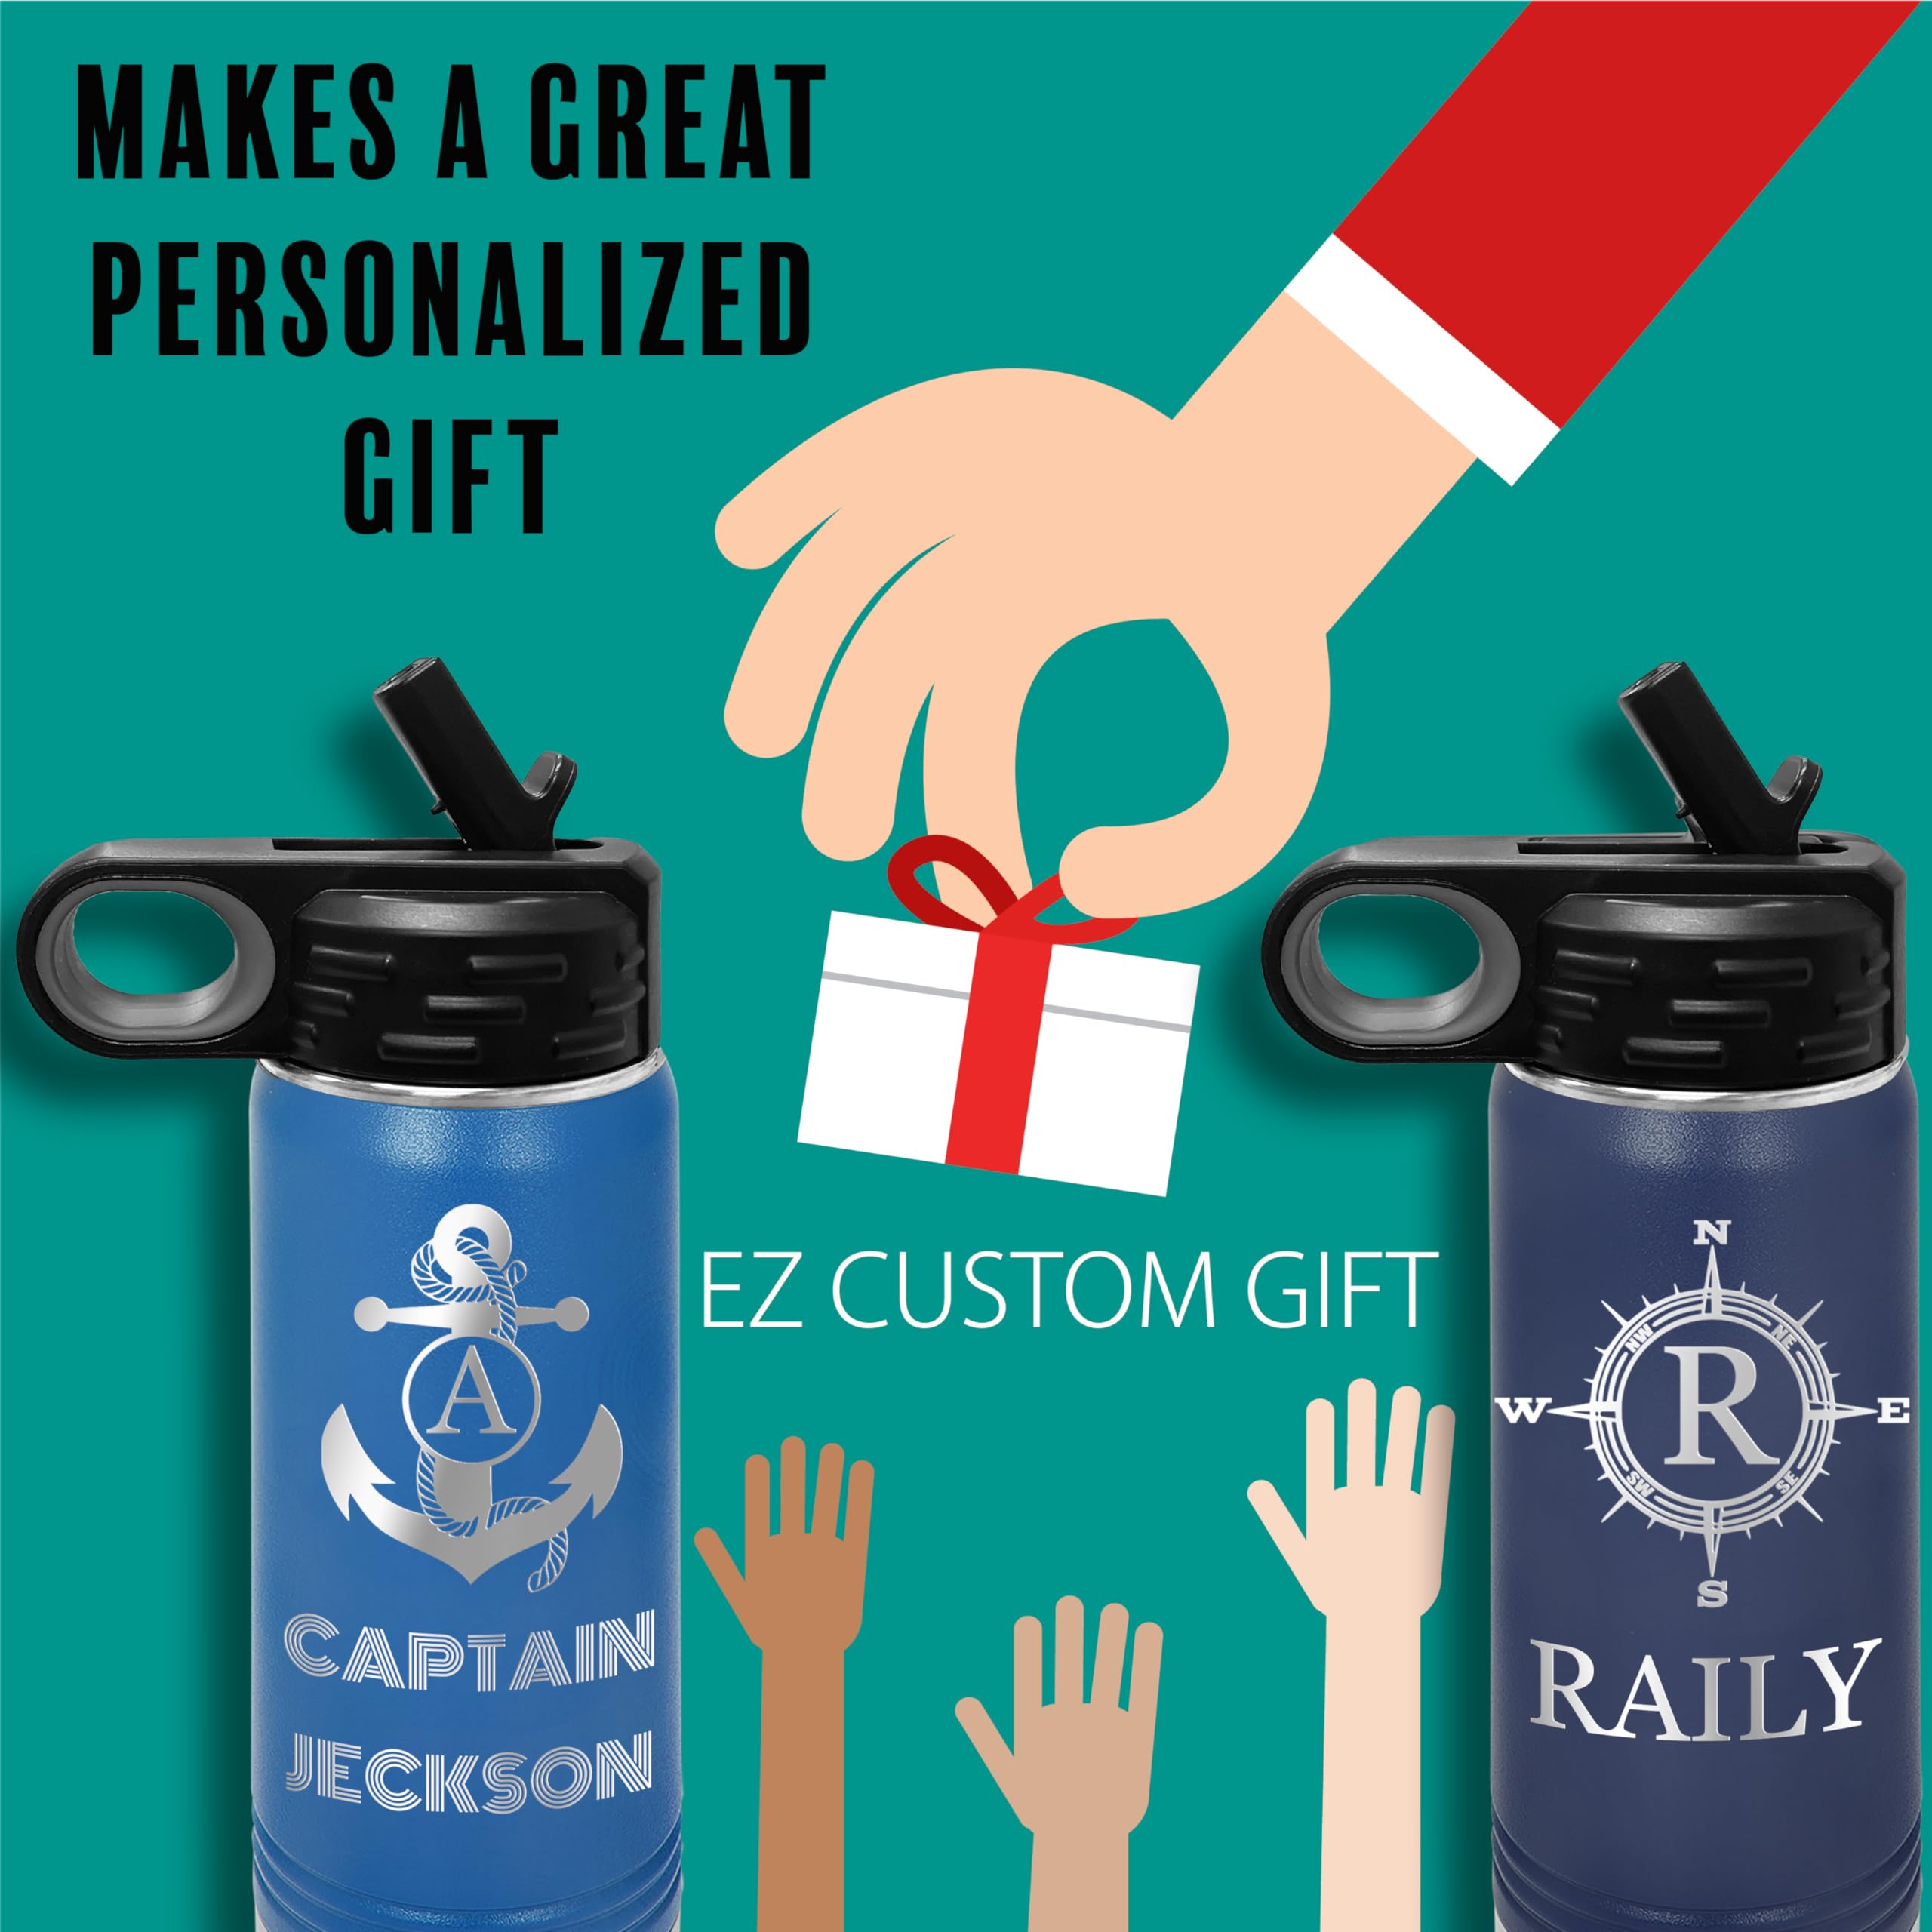 Customized Kids Water Bottle 20oz with Flip-Top Lid and Straw, Personalized Stainless Steel Insulated Flask Sports Kids Thermos Name Engraved for Birthday Boys Girls Kids Custom Gift (Navy Blue)